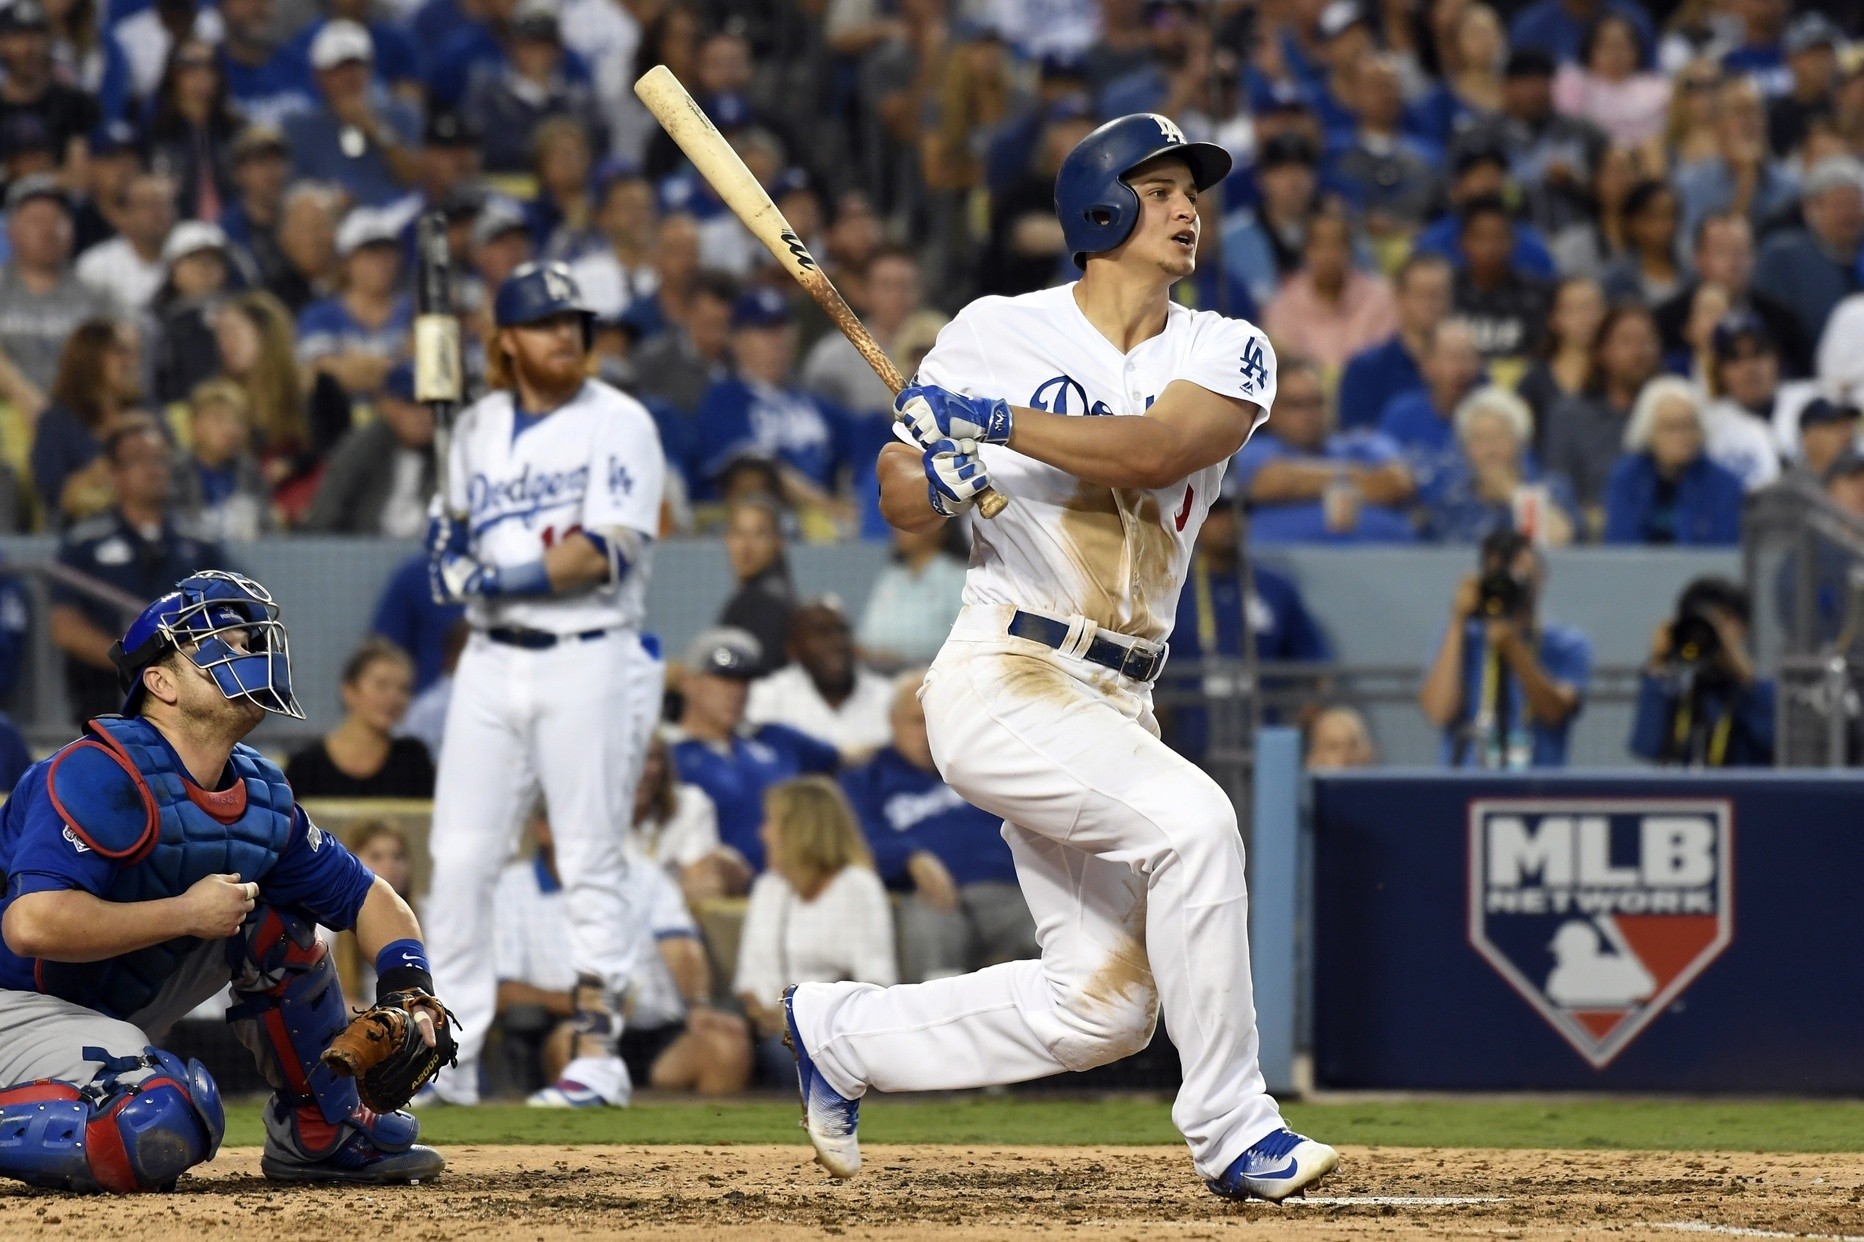 Dodgers: Corey Seager is this generation's Derek Jeter but better